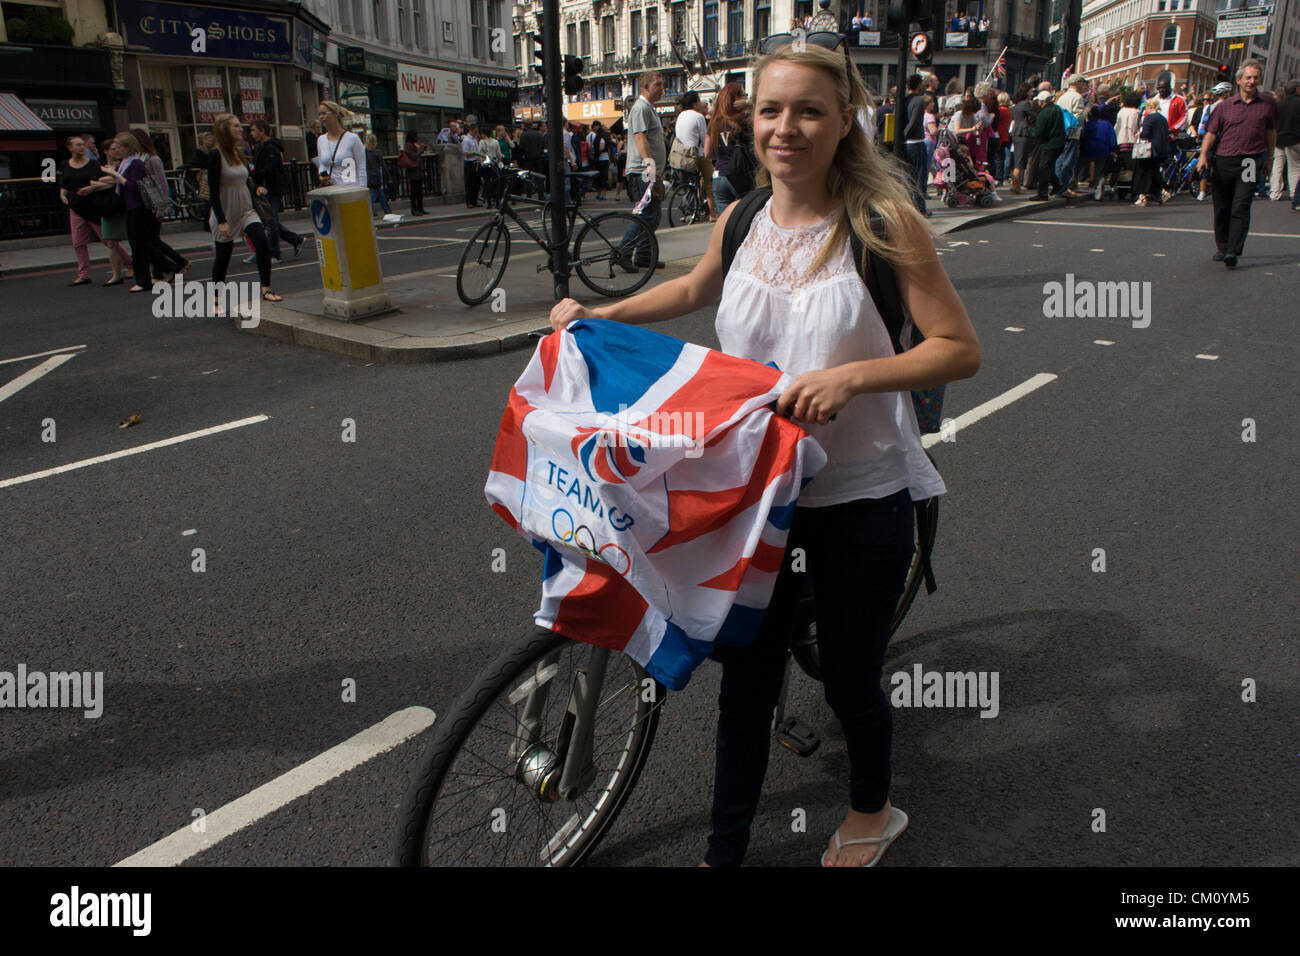 London, 10th September 2012. Olympic fan leaves the athletes' parade in the City of London. The day after the end of the London 2012 Paralympics, thousands of spectators lined the capital's streets to honour 800 of TeamGB's athletes and Paralympians. Britain's golden generation of athletes in turn said thank you to its Olympic followers, paying tribute to London and a wider Britain as up to a million people lined the streets to celebrate the “greatest ever” sporting summer and billed to be the biggest sporting celebration ever seen in the UK. Stock Photo